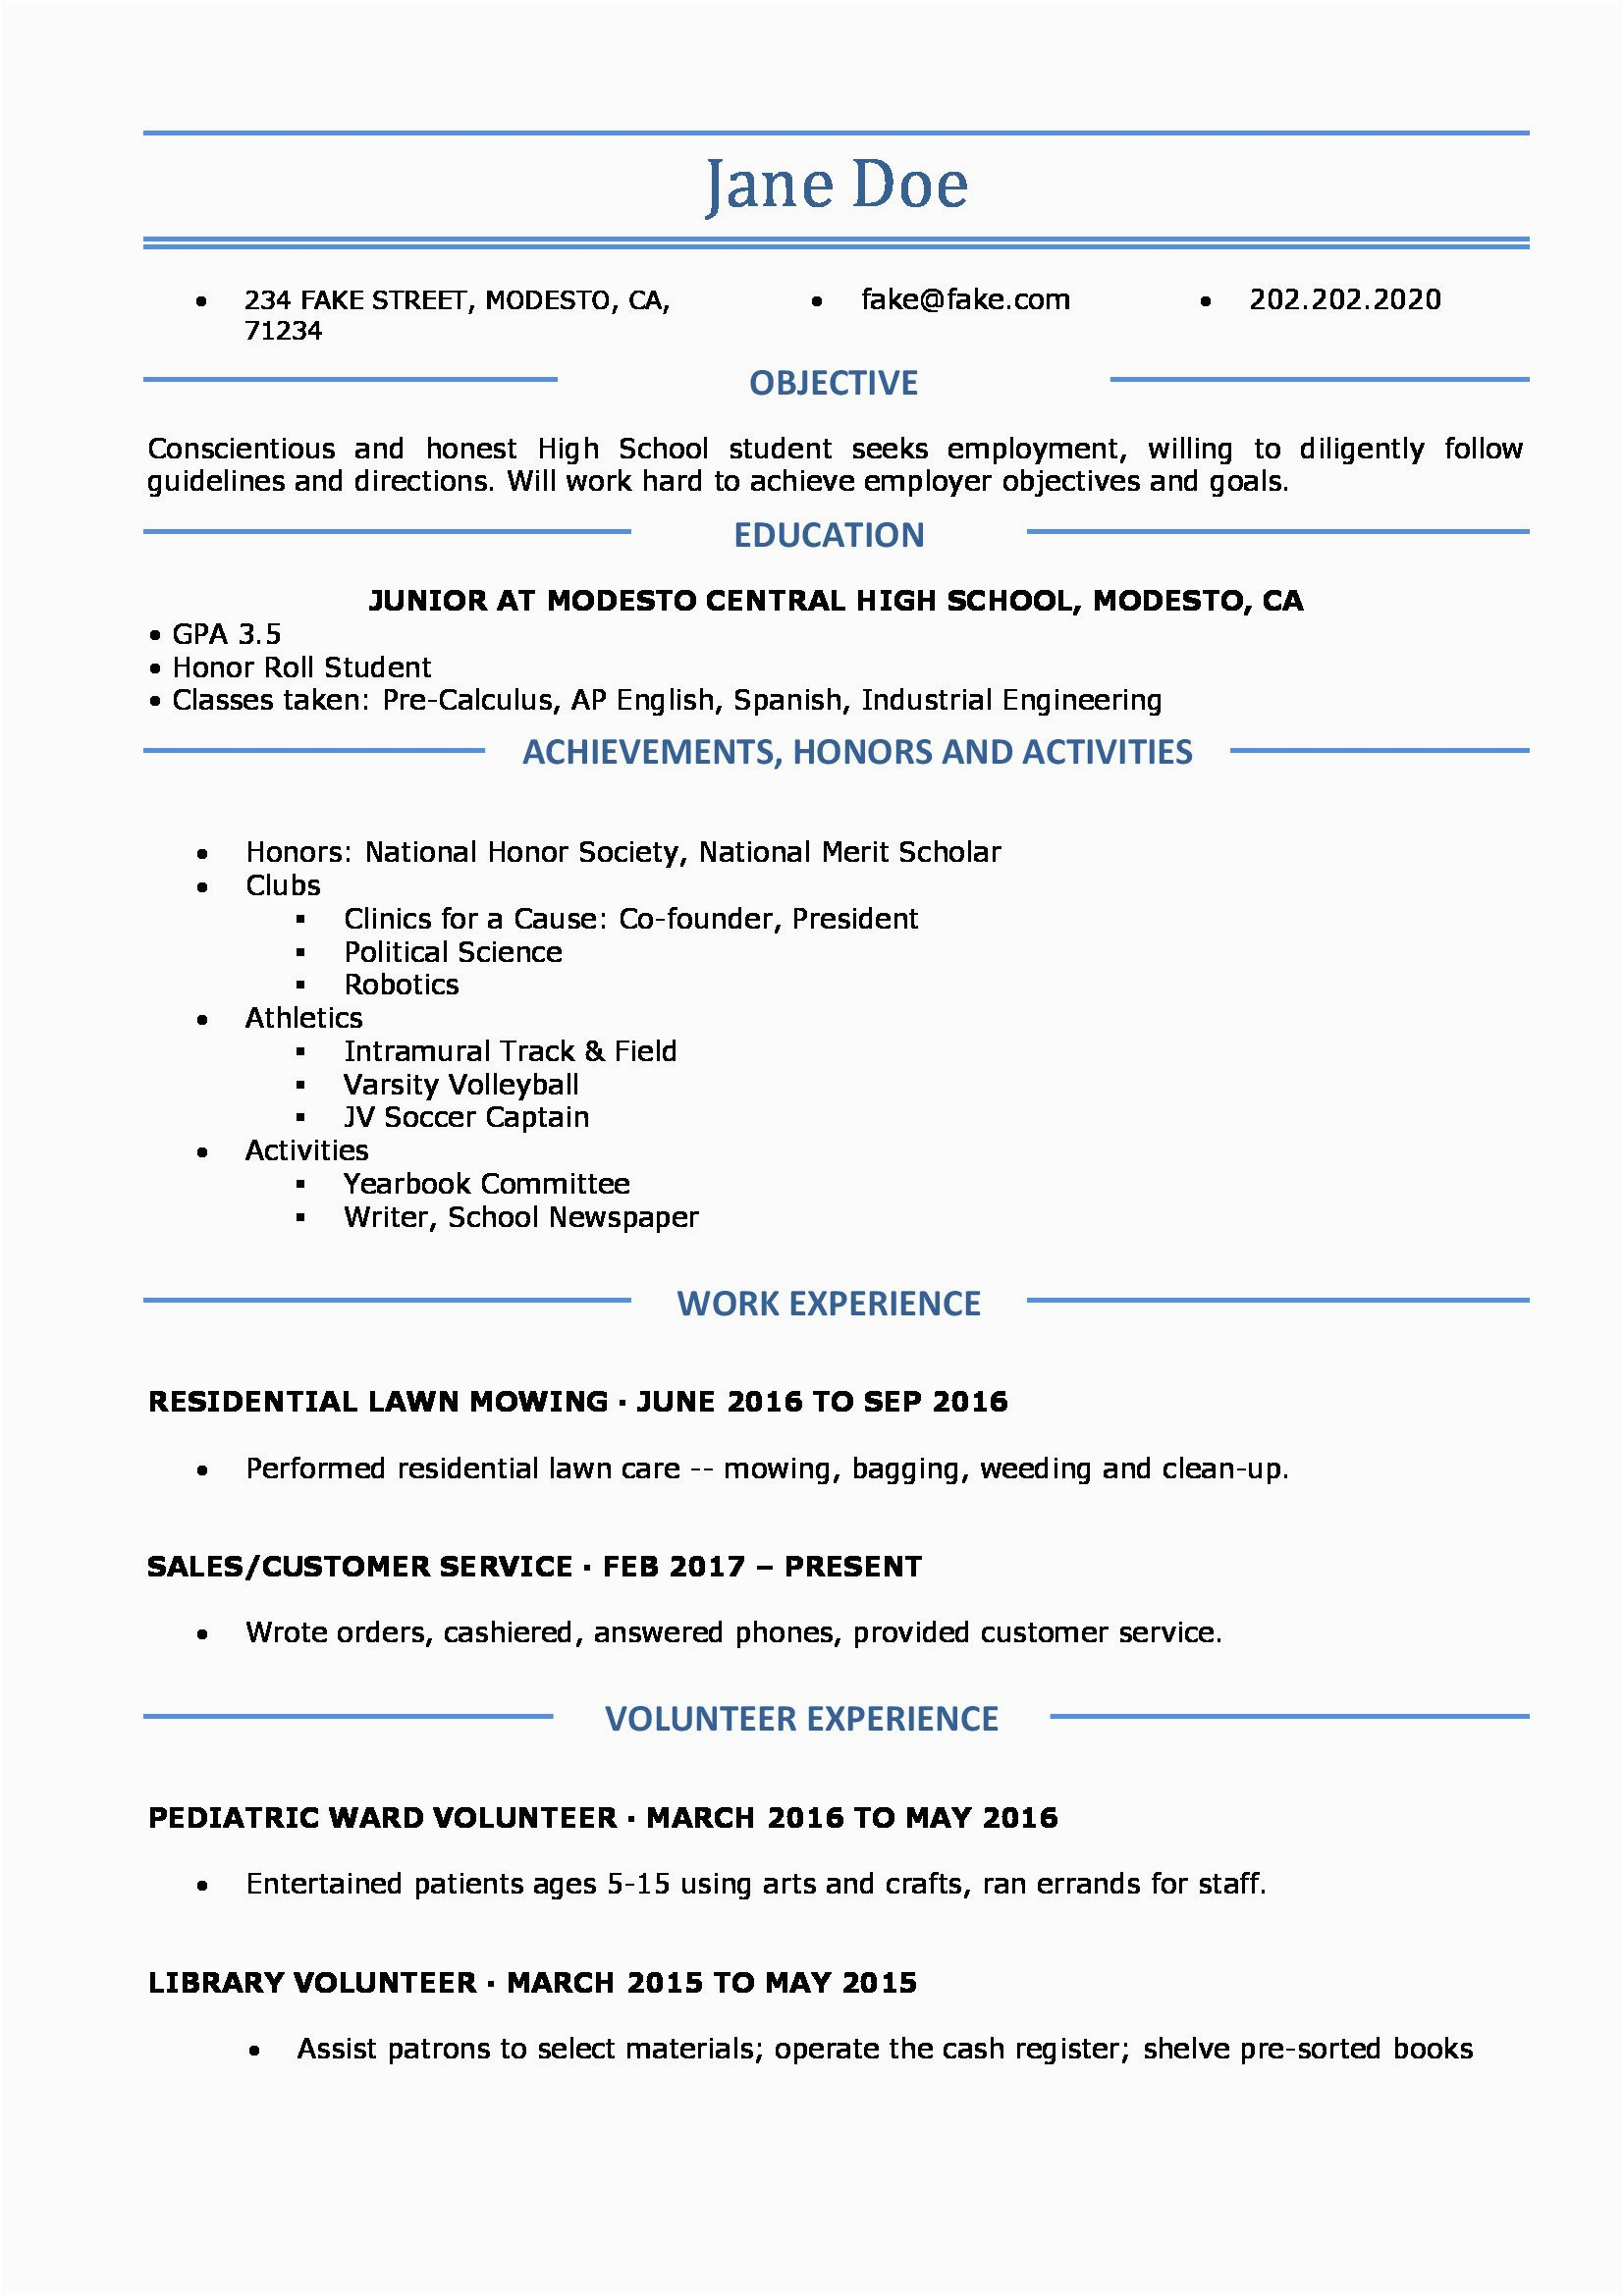 Template Resume for High School Student Resumes for High School Students Luxury High School Resume